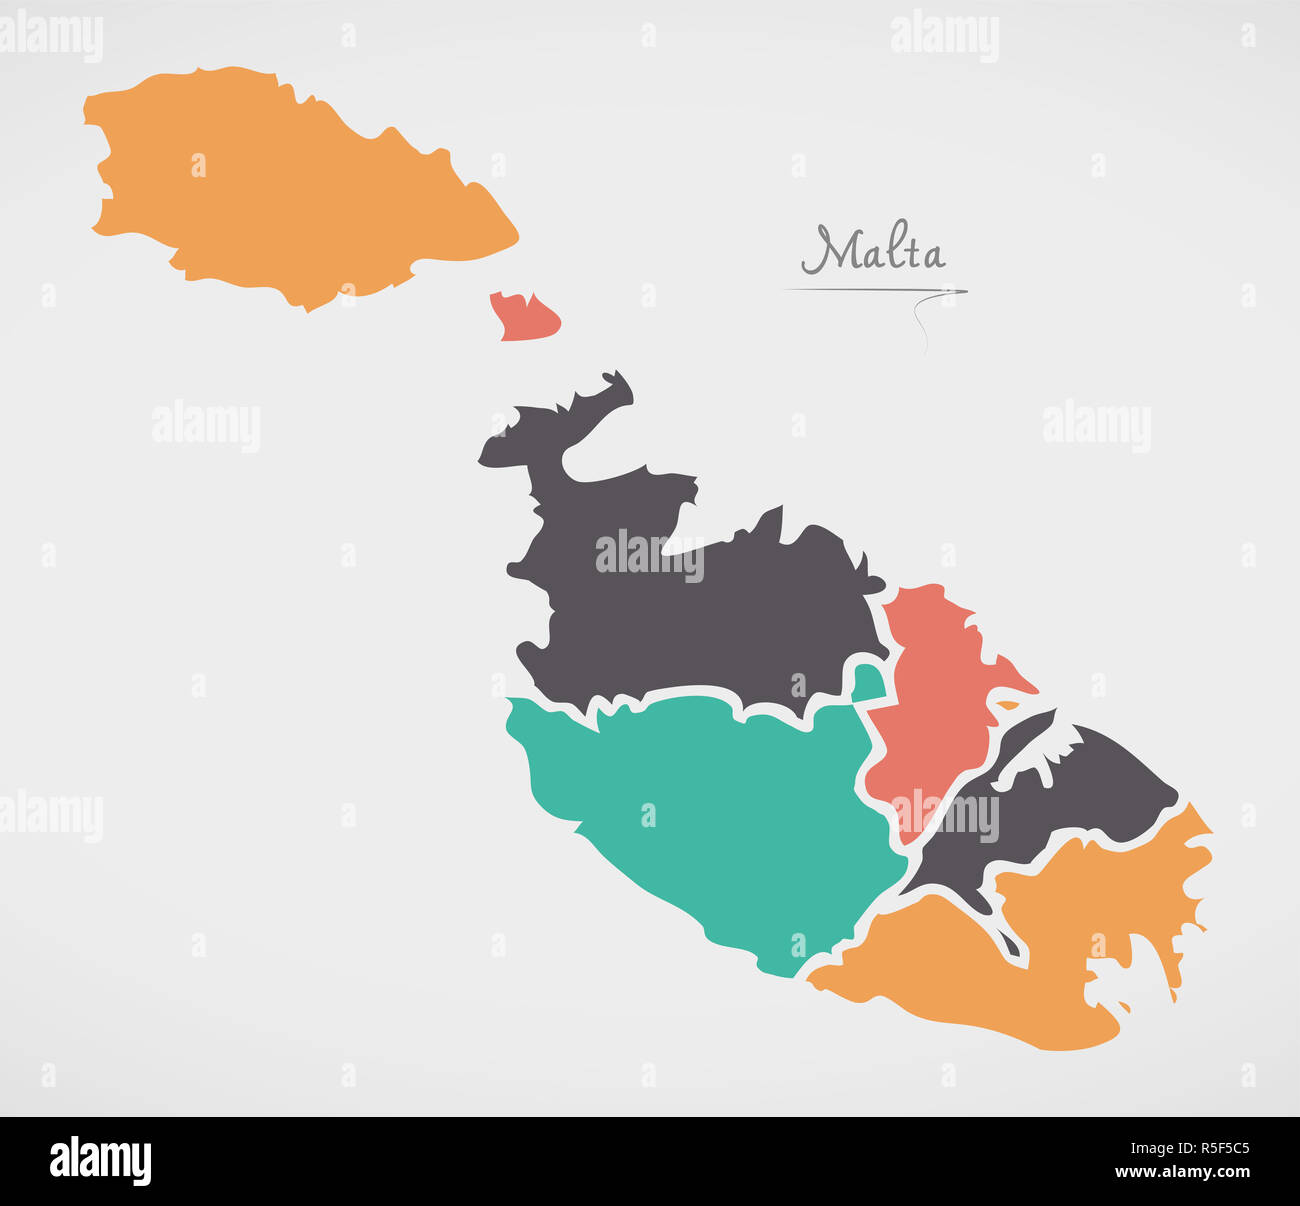 Malta Map with states and modern round shapes Stock Photo